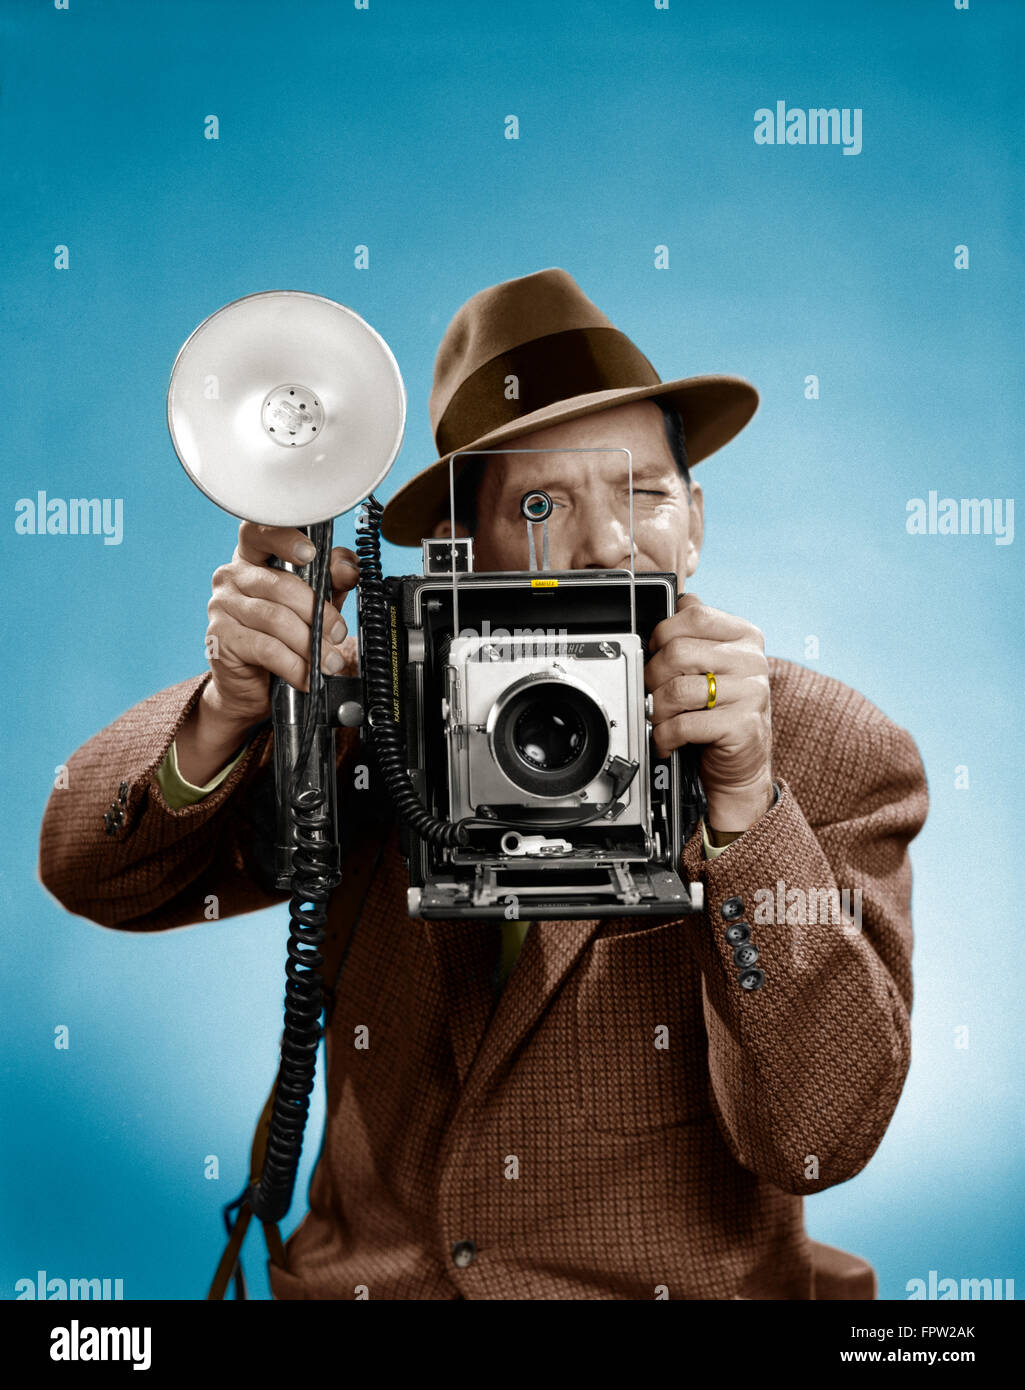 1950s PRESS PHOTOGRAPHER MAN HOLDING A 4X5 SPEED GRAPHIC CAMERA WITH  PORTABLE STROBE FLASH Stock Photo - Alamy